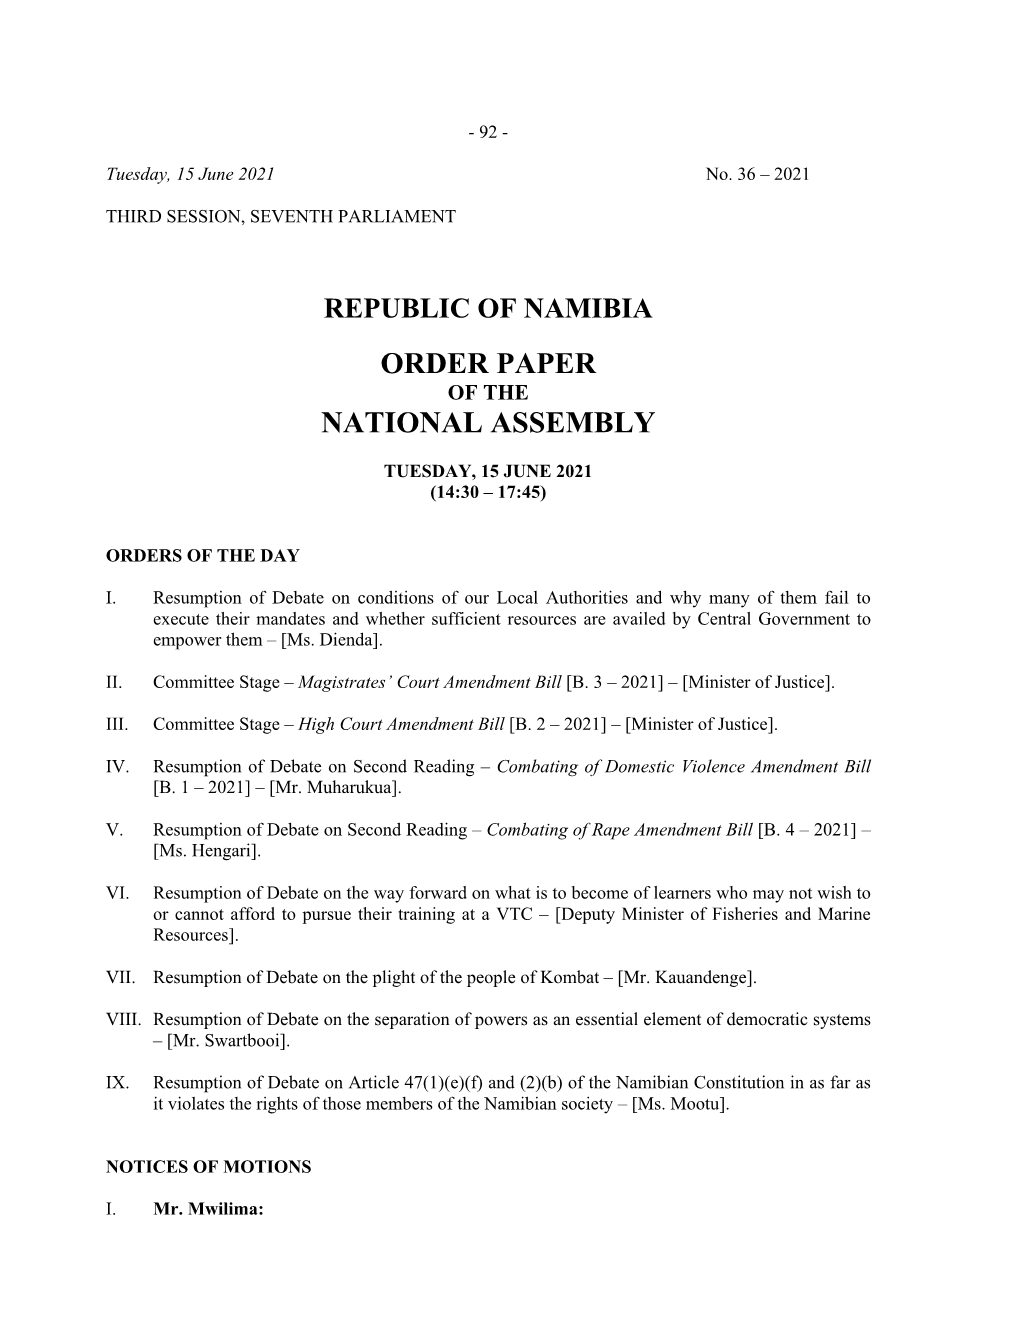 Order Paper No. 36: Tuesday, 15 June 2021